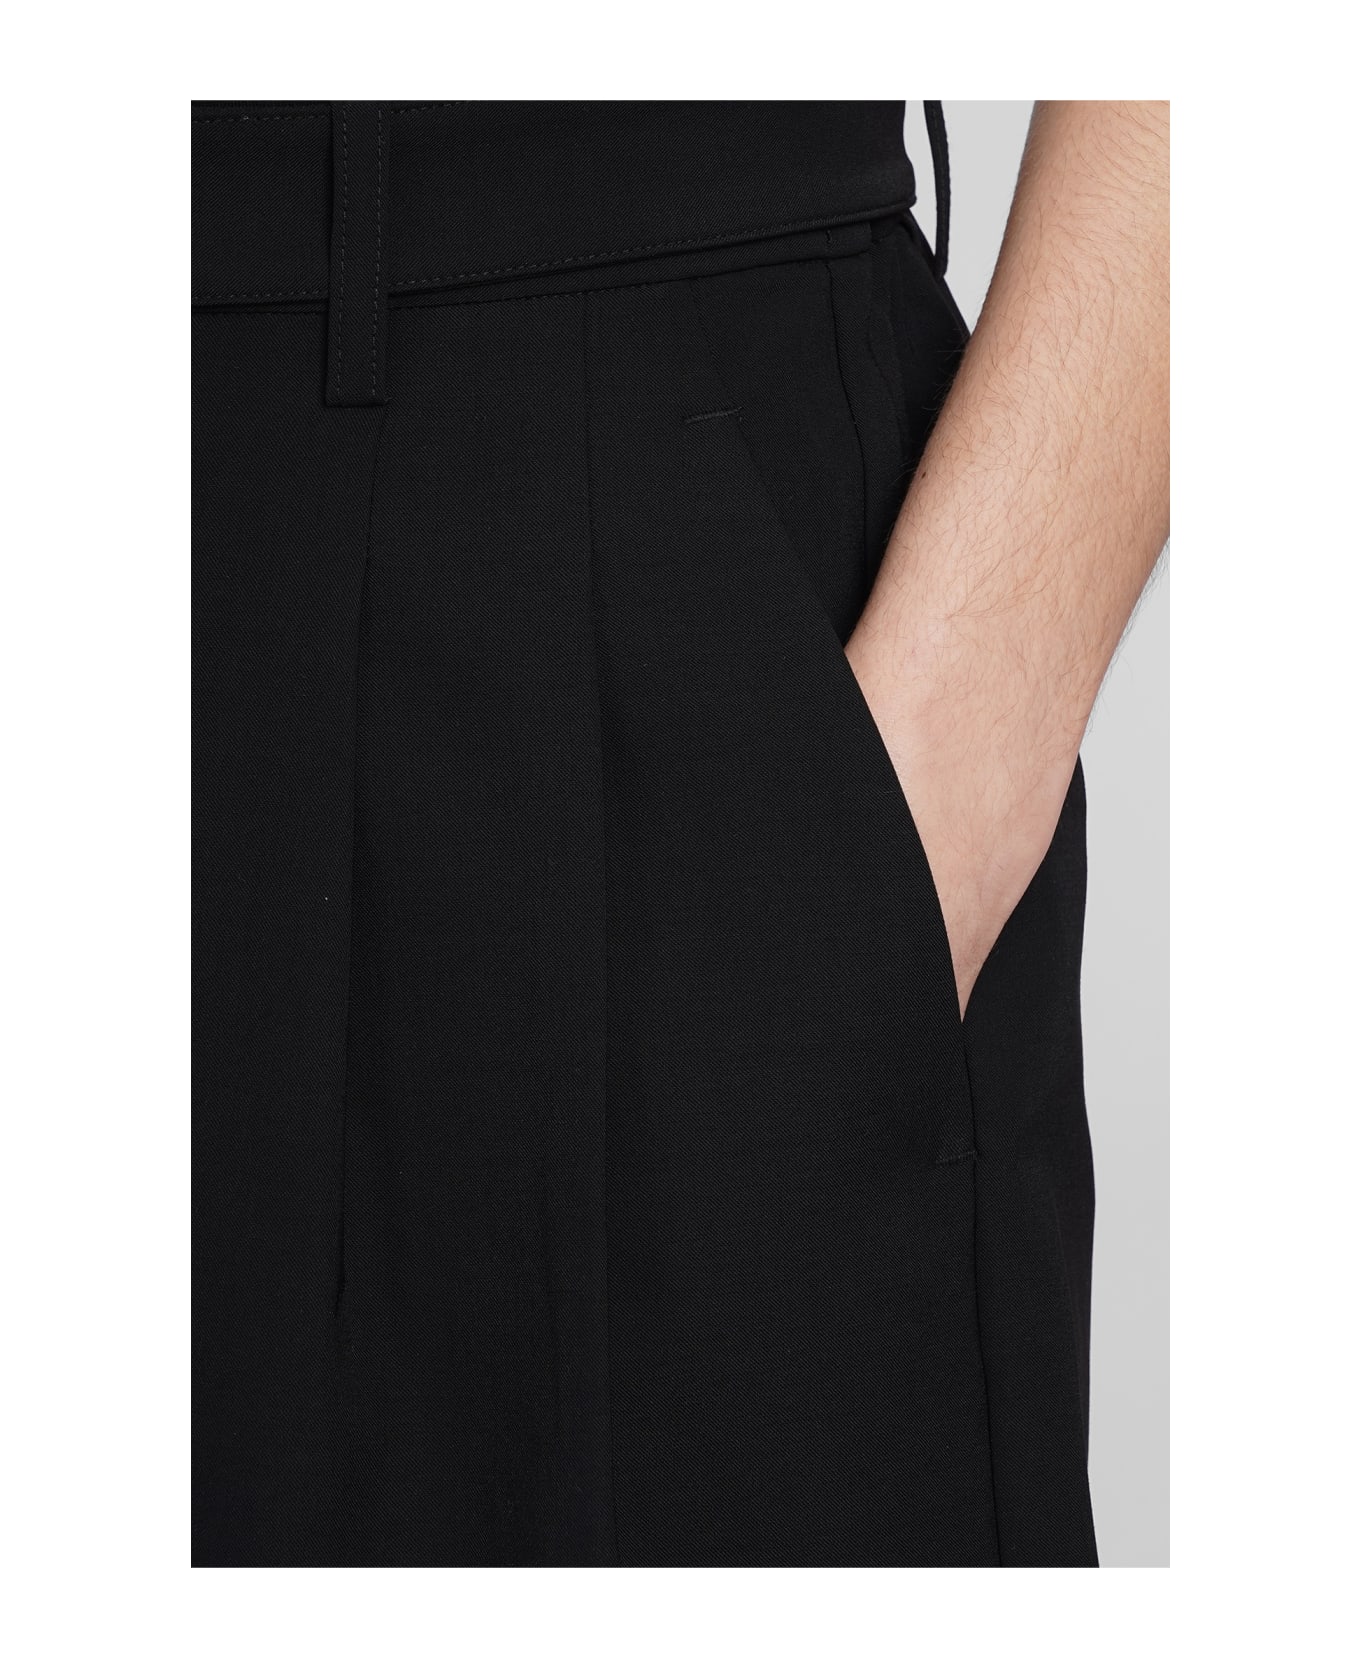 Attachment Shorts In Black Polyester - black